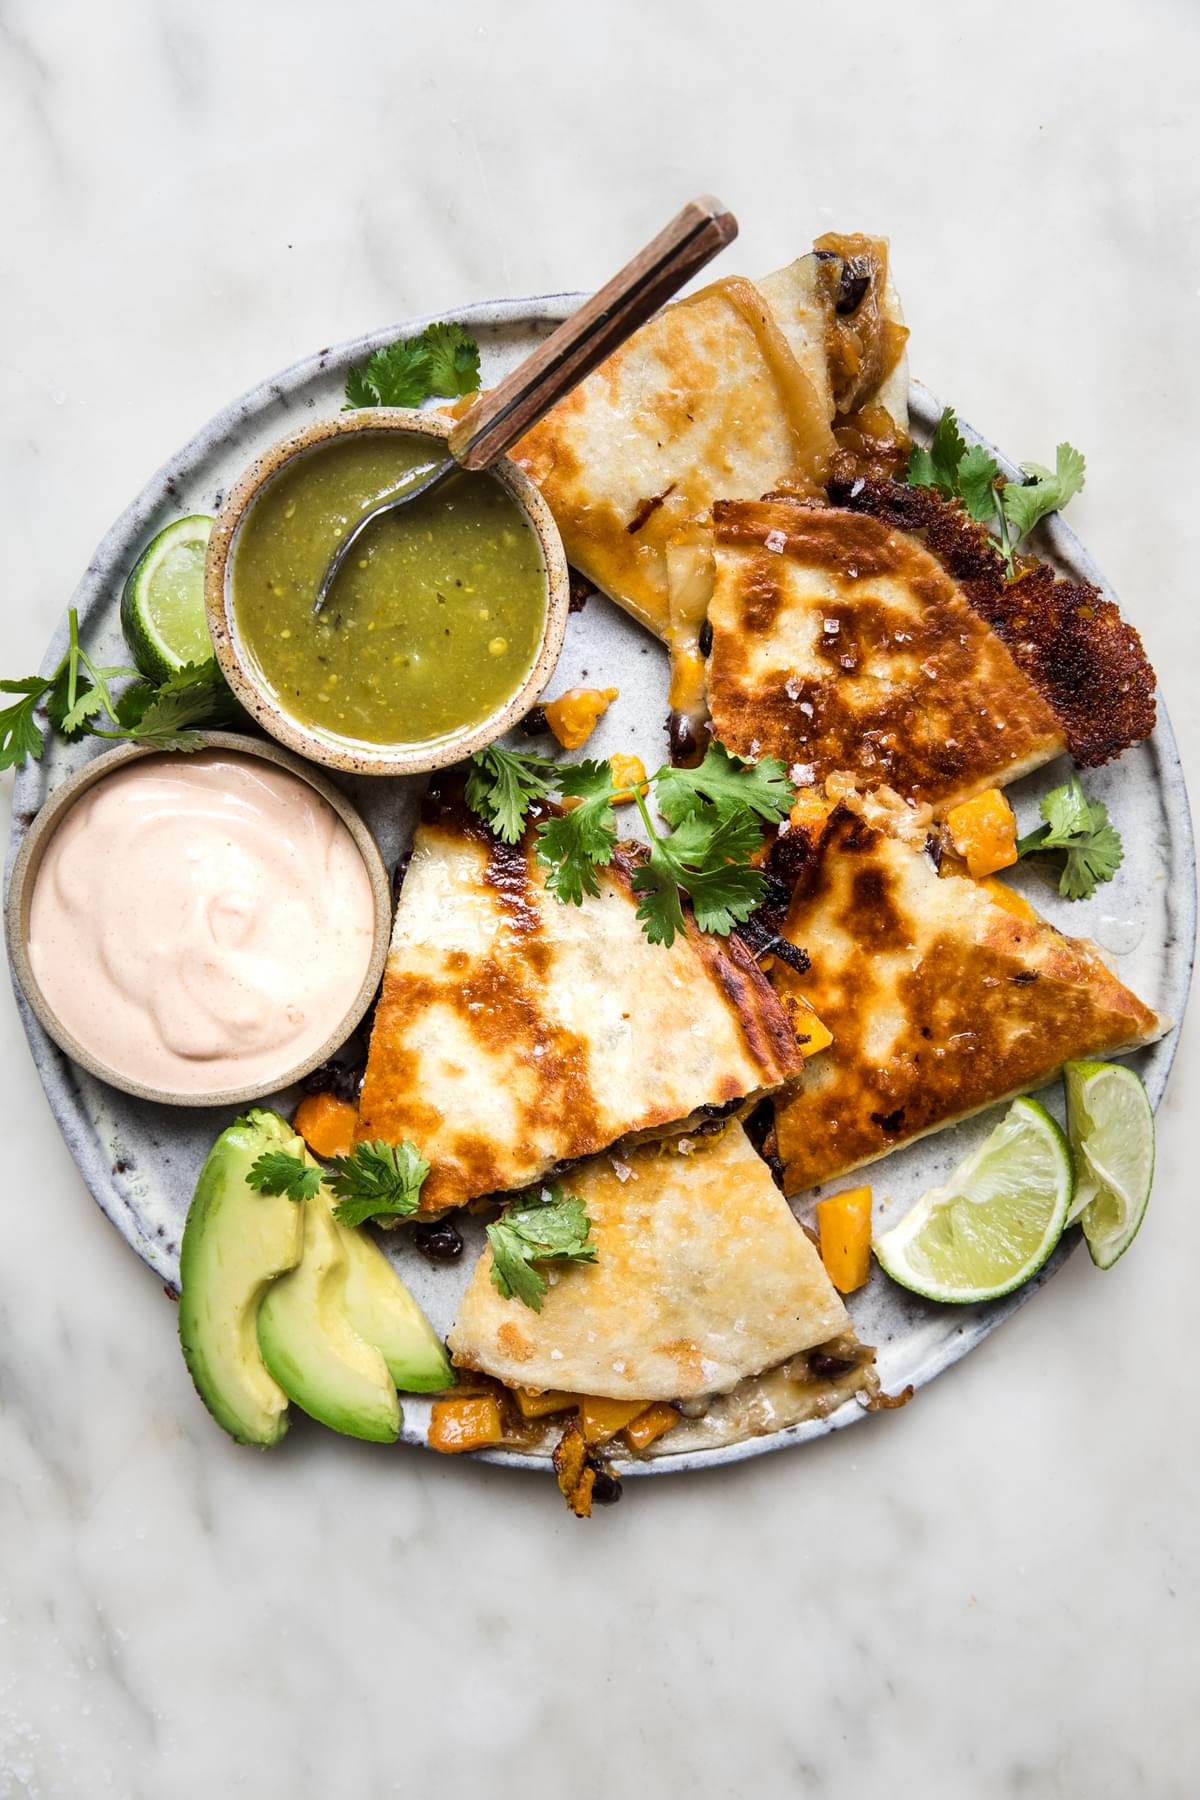 butternut squash quesadilla with caramelized onions on a plate served with avocado, salsa verde, chipotle cream & cilantro